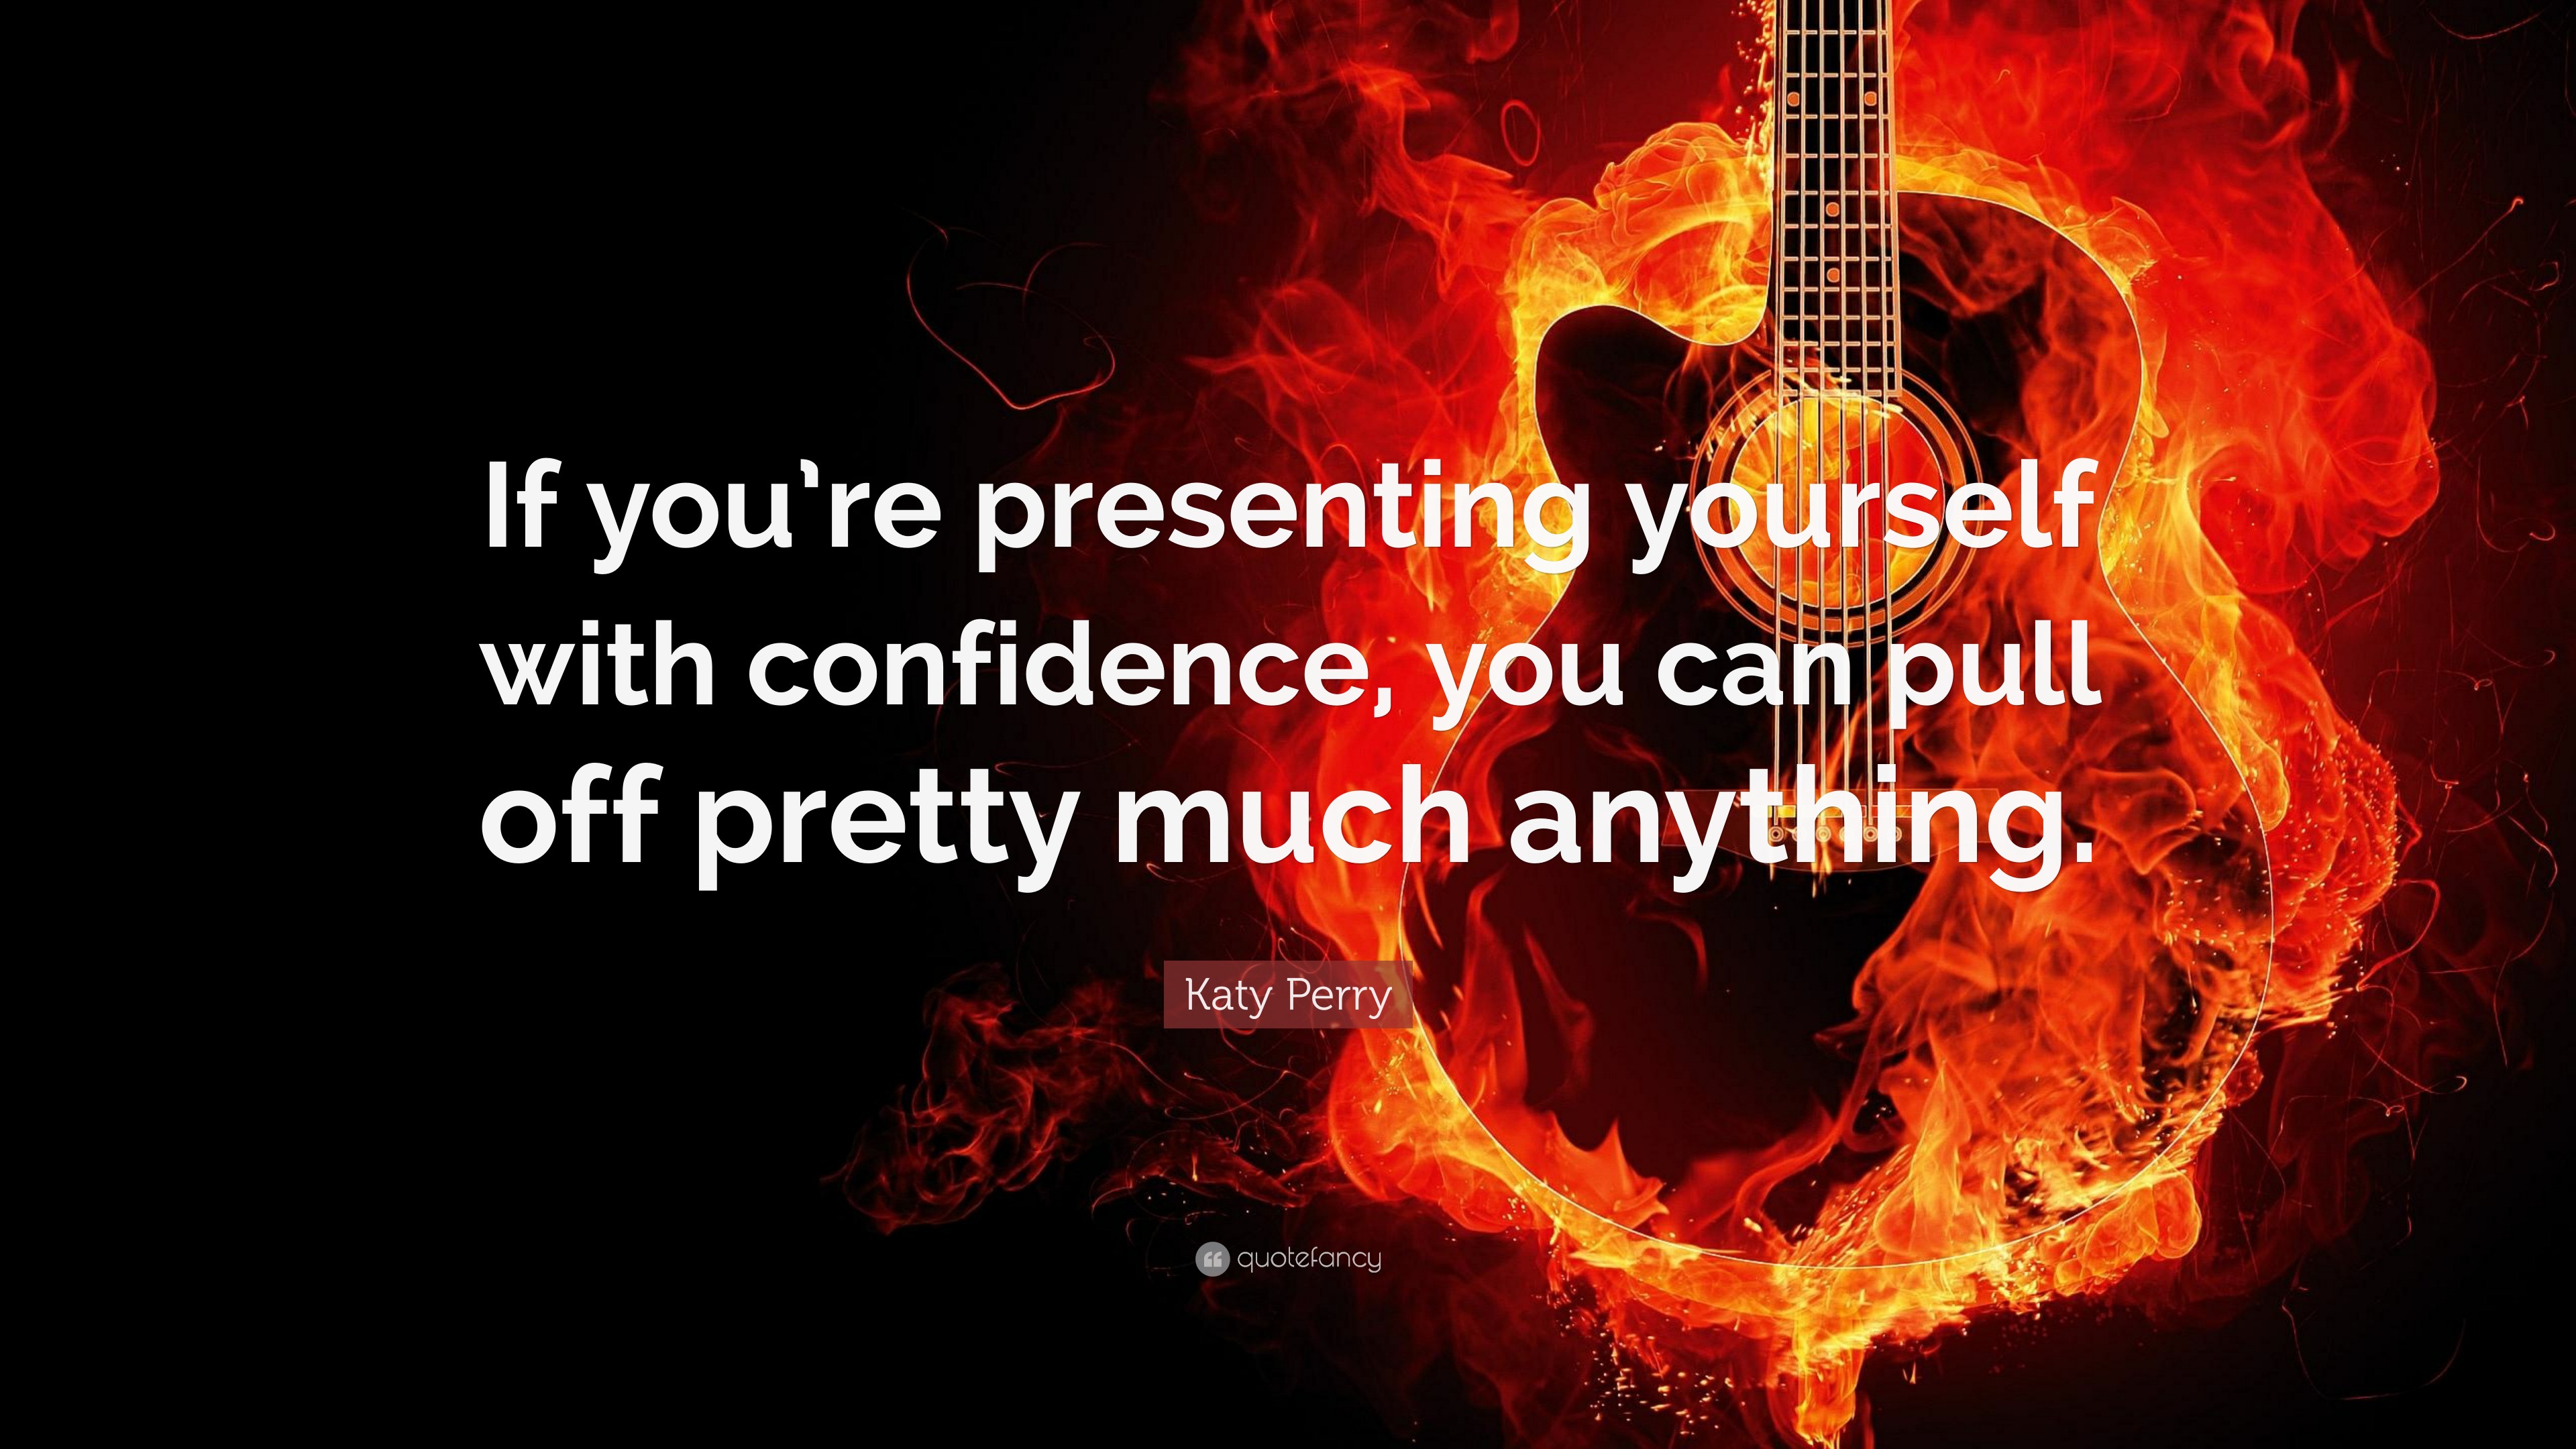 Confidence Quotes (50 Wallpapers) - Quotefancy